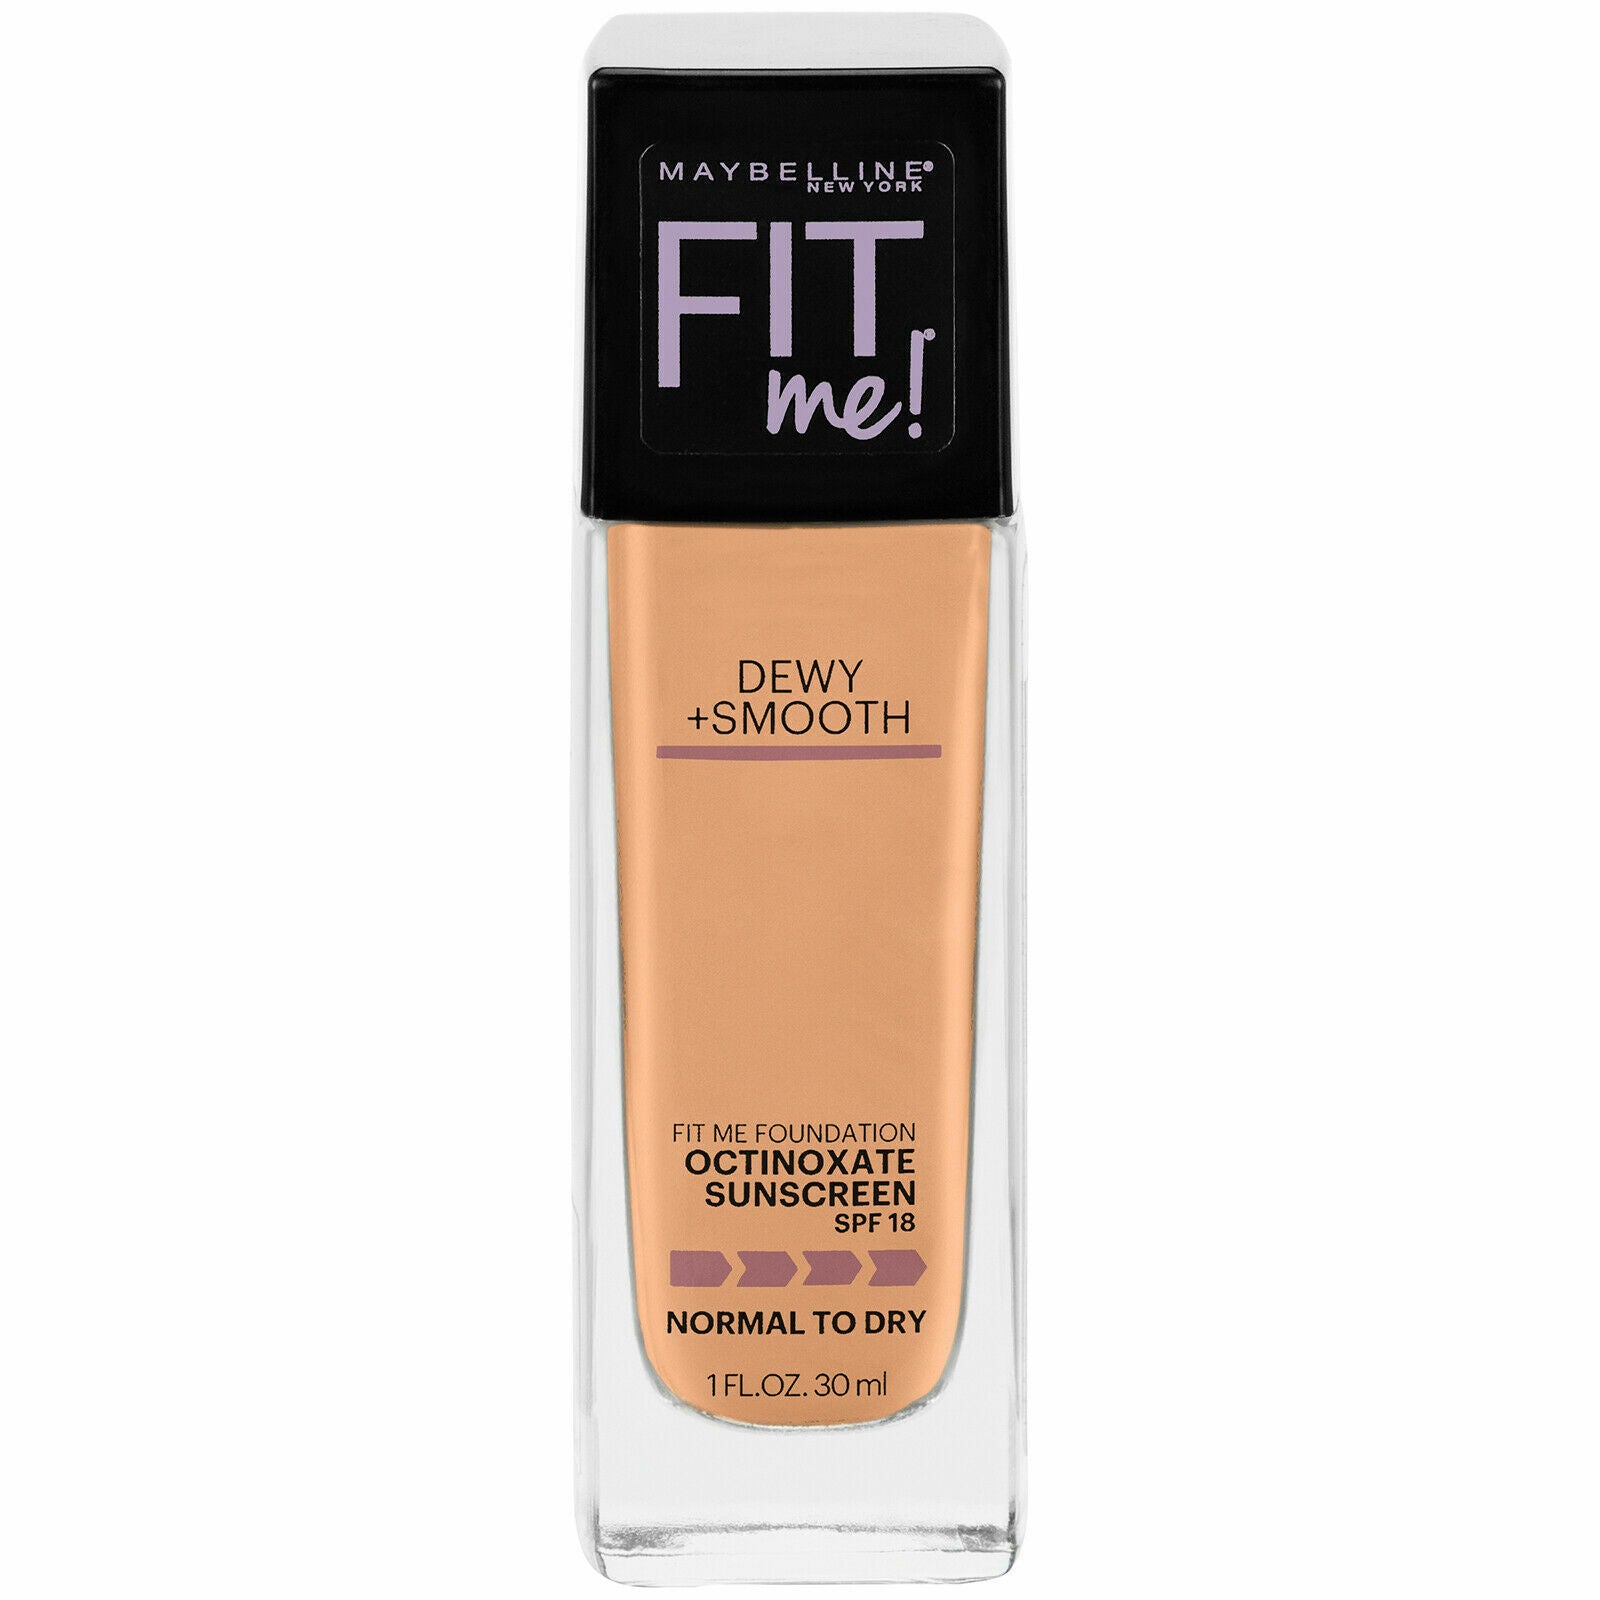 Maybelline Fit Me Dewy + Smooth Foundation - Fair Porcelain